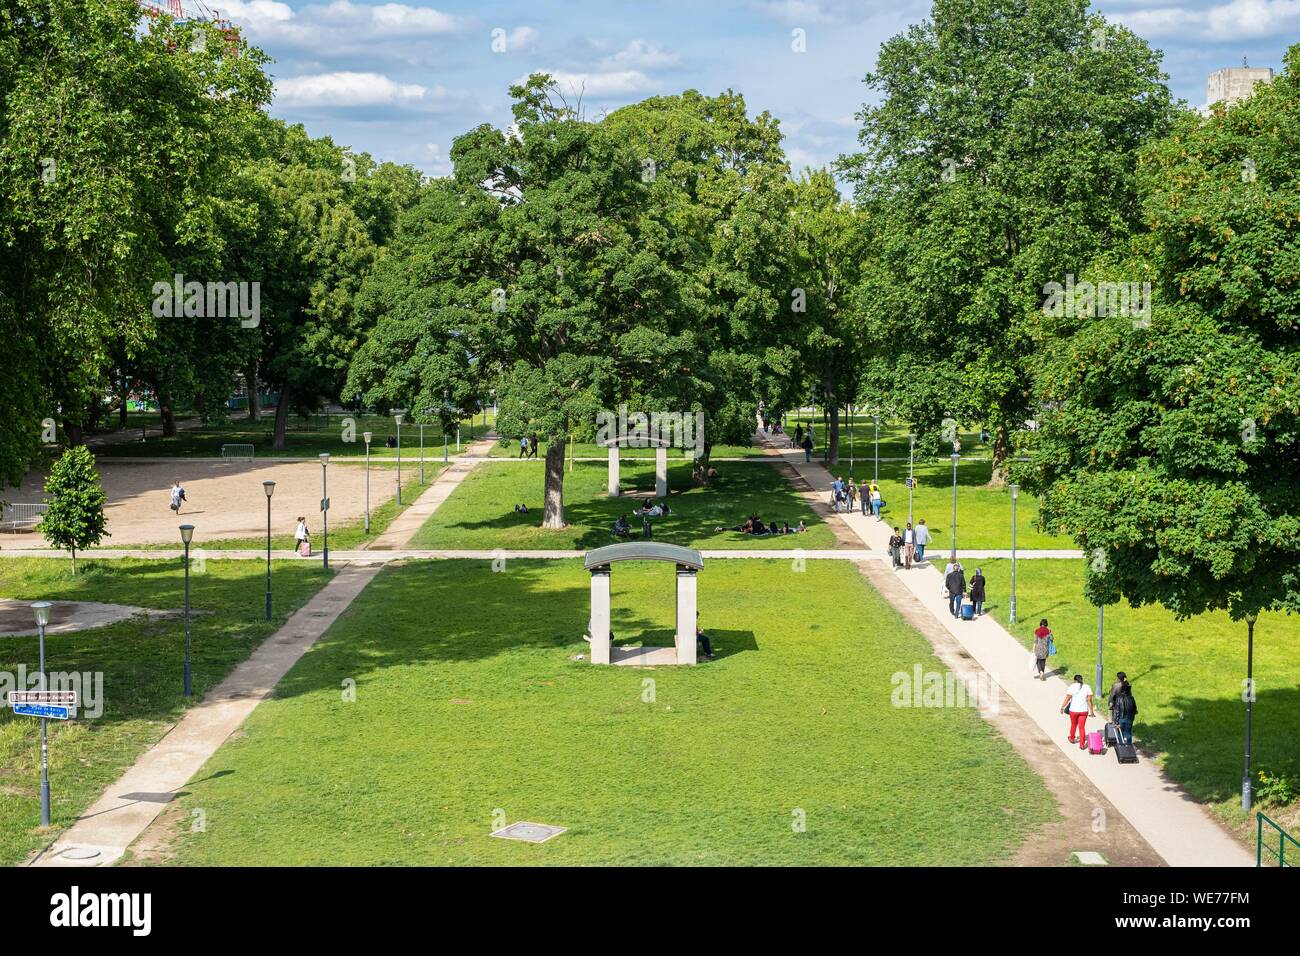 France, Paris, along the GR® Paris 2024, metropolitan long-distance hiking trail created in support of Paris bid for the 2024 Olympic Games, Bercy district, Parc de Bercy Stock Photo